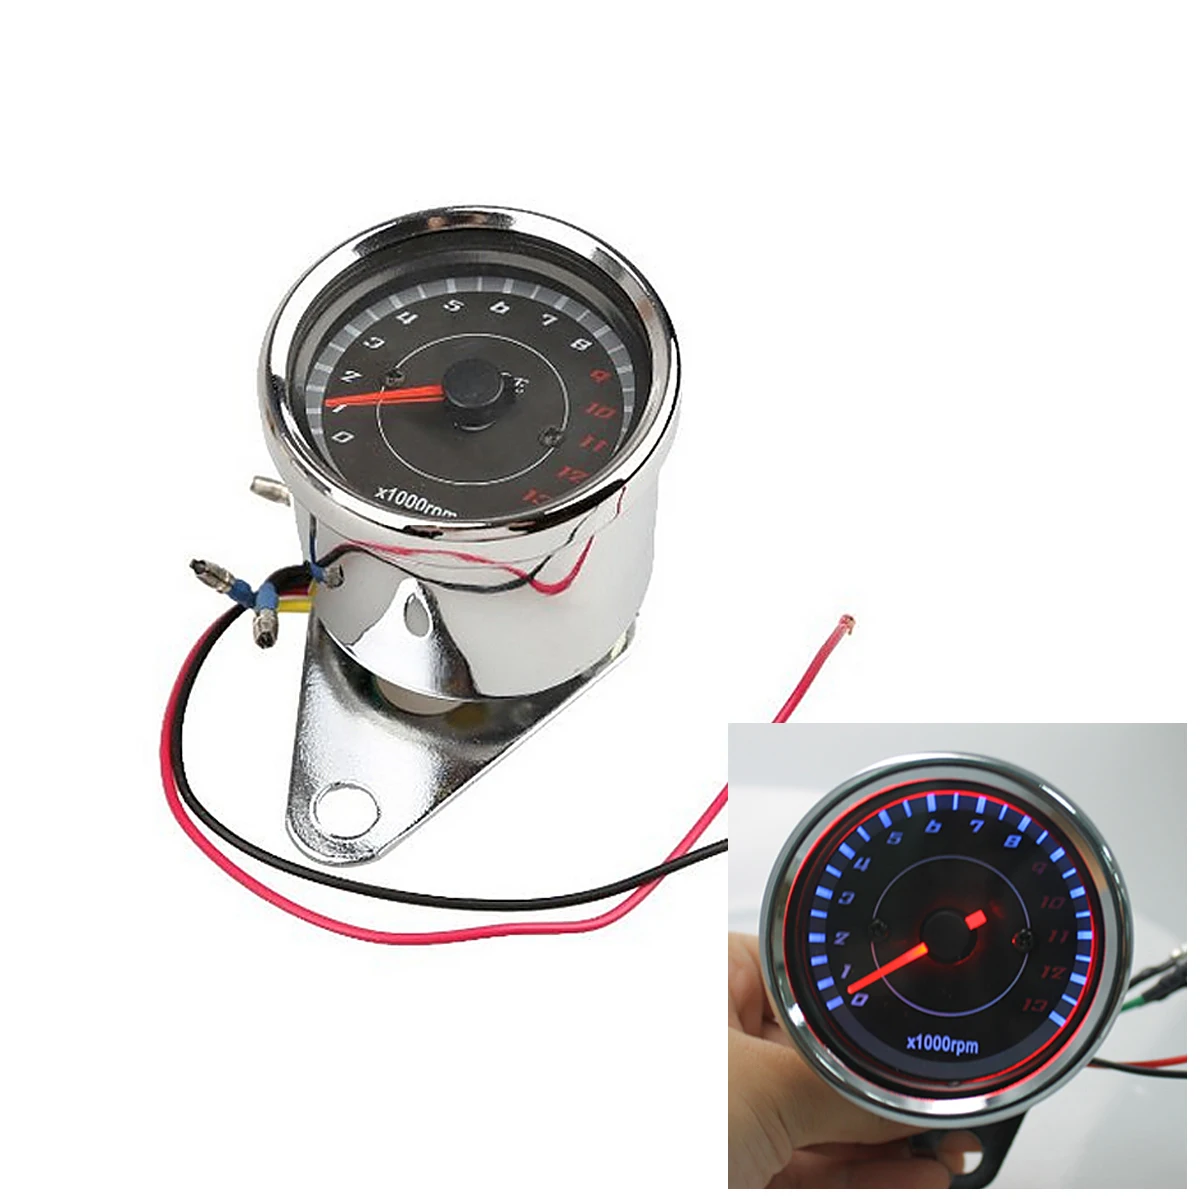 Universal Motorcycle Bike Tachometer Rev Counter with LED Night Light